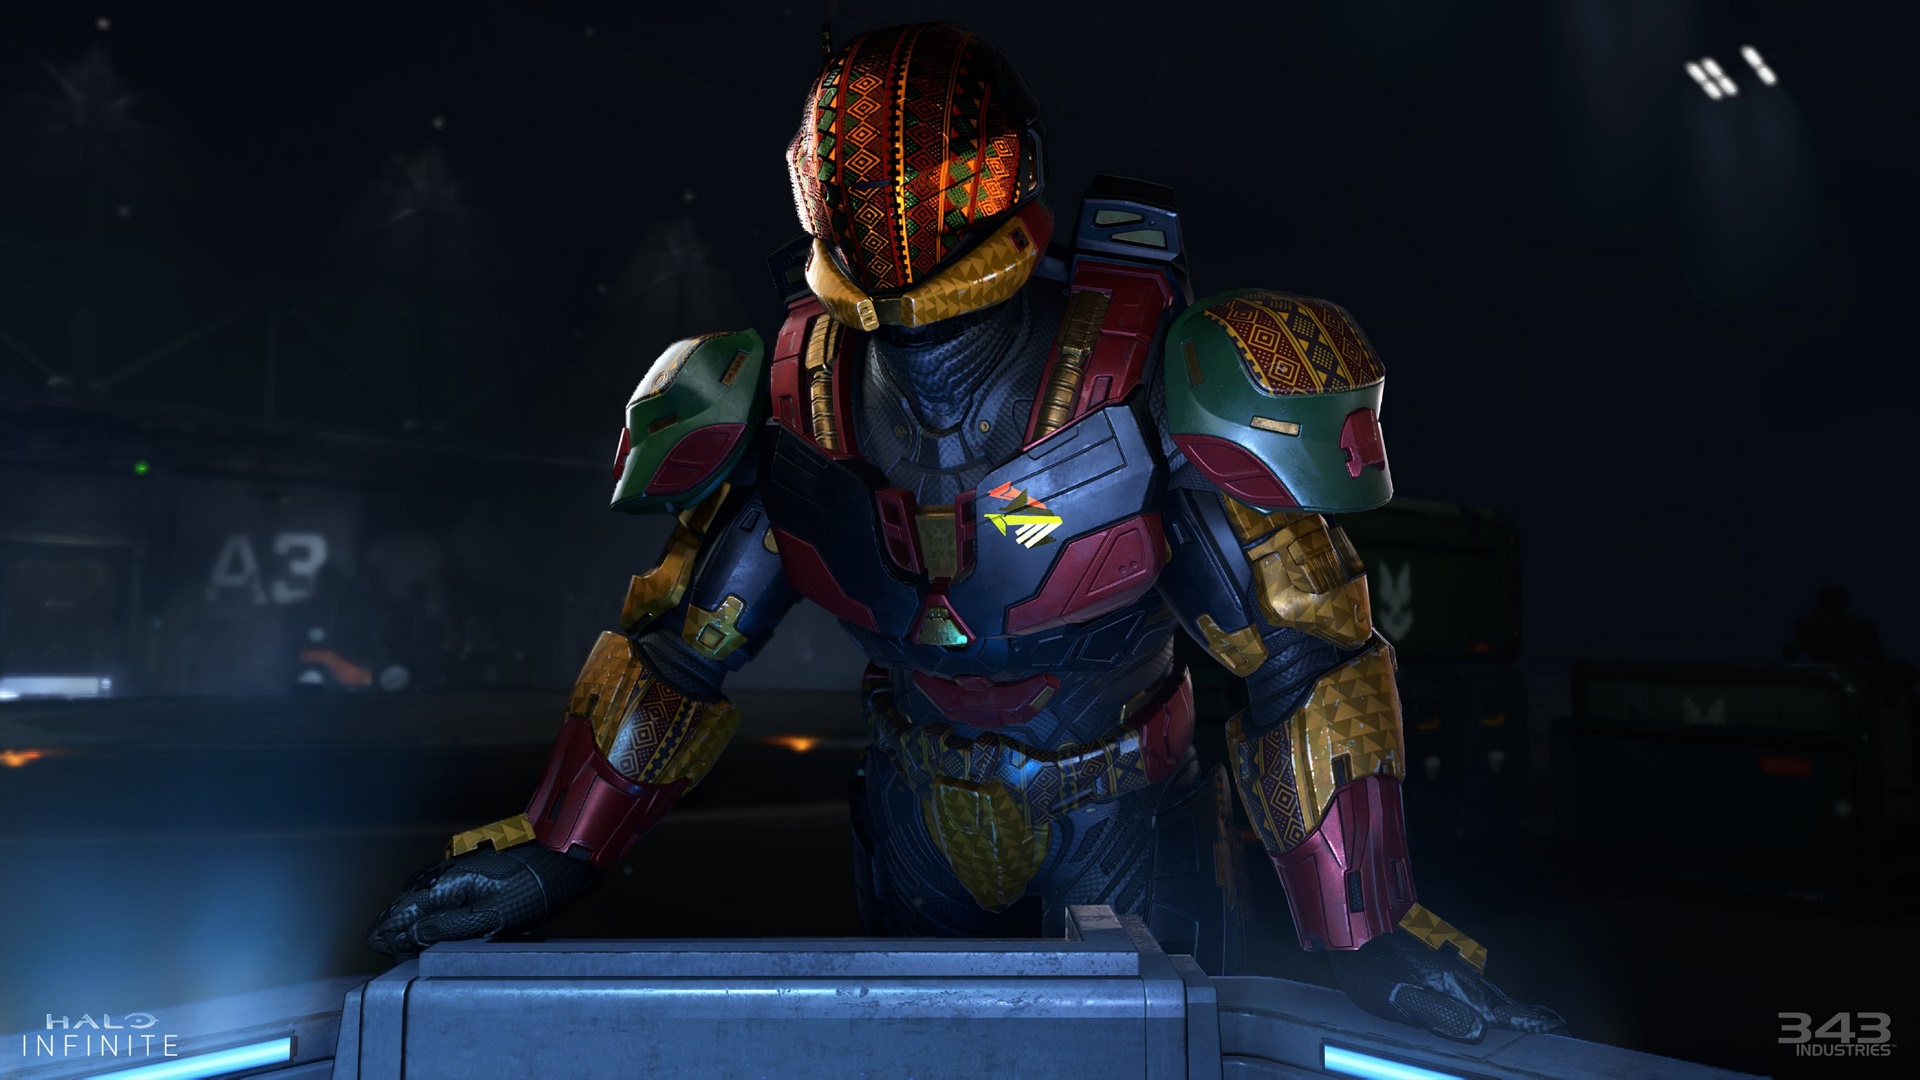 Halo Infinite screenshot showing a Spartan with the Black History Month armor coating, visor, and emblem